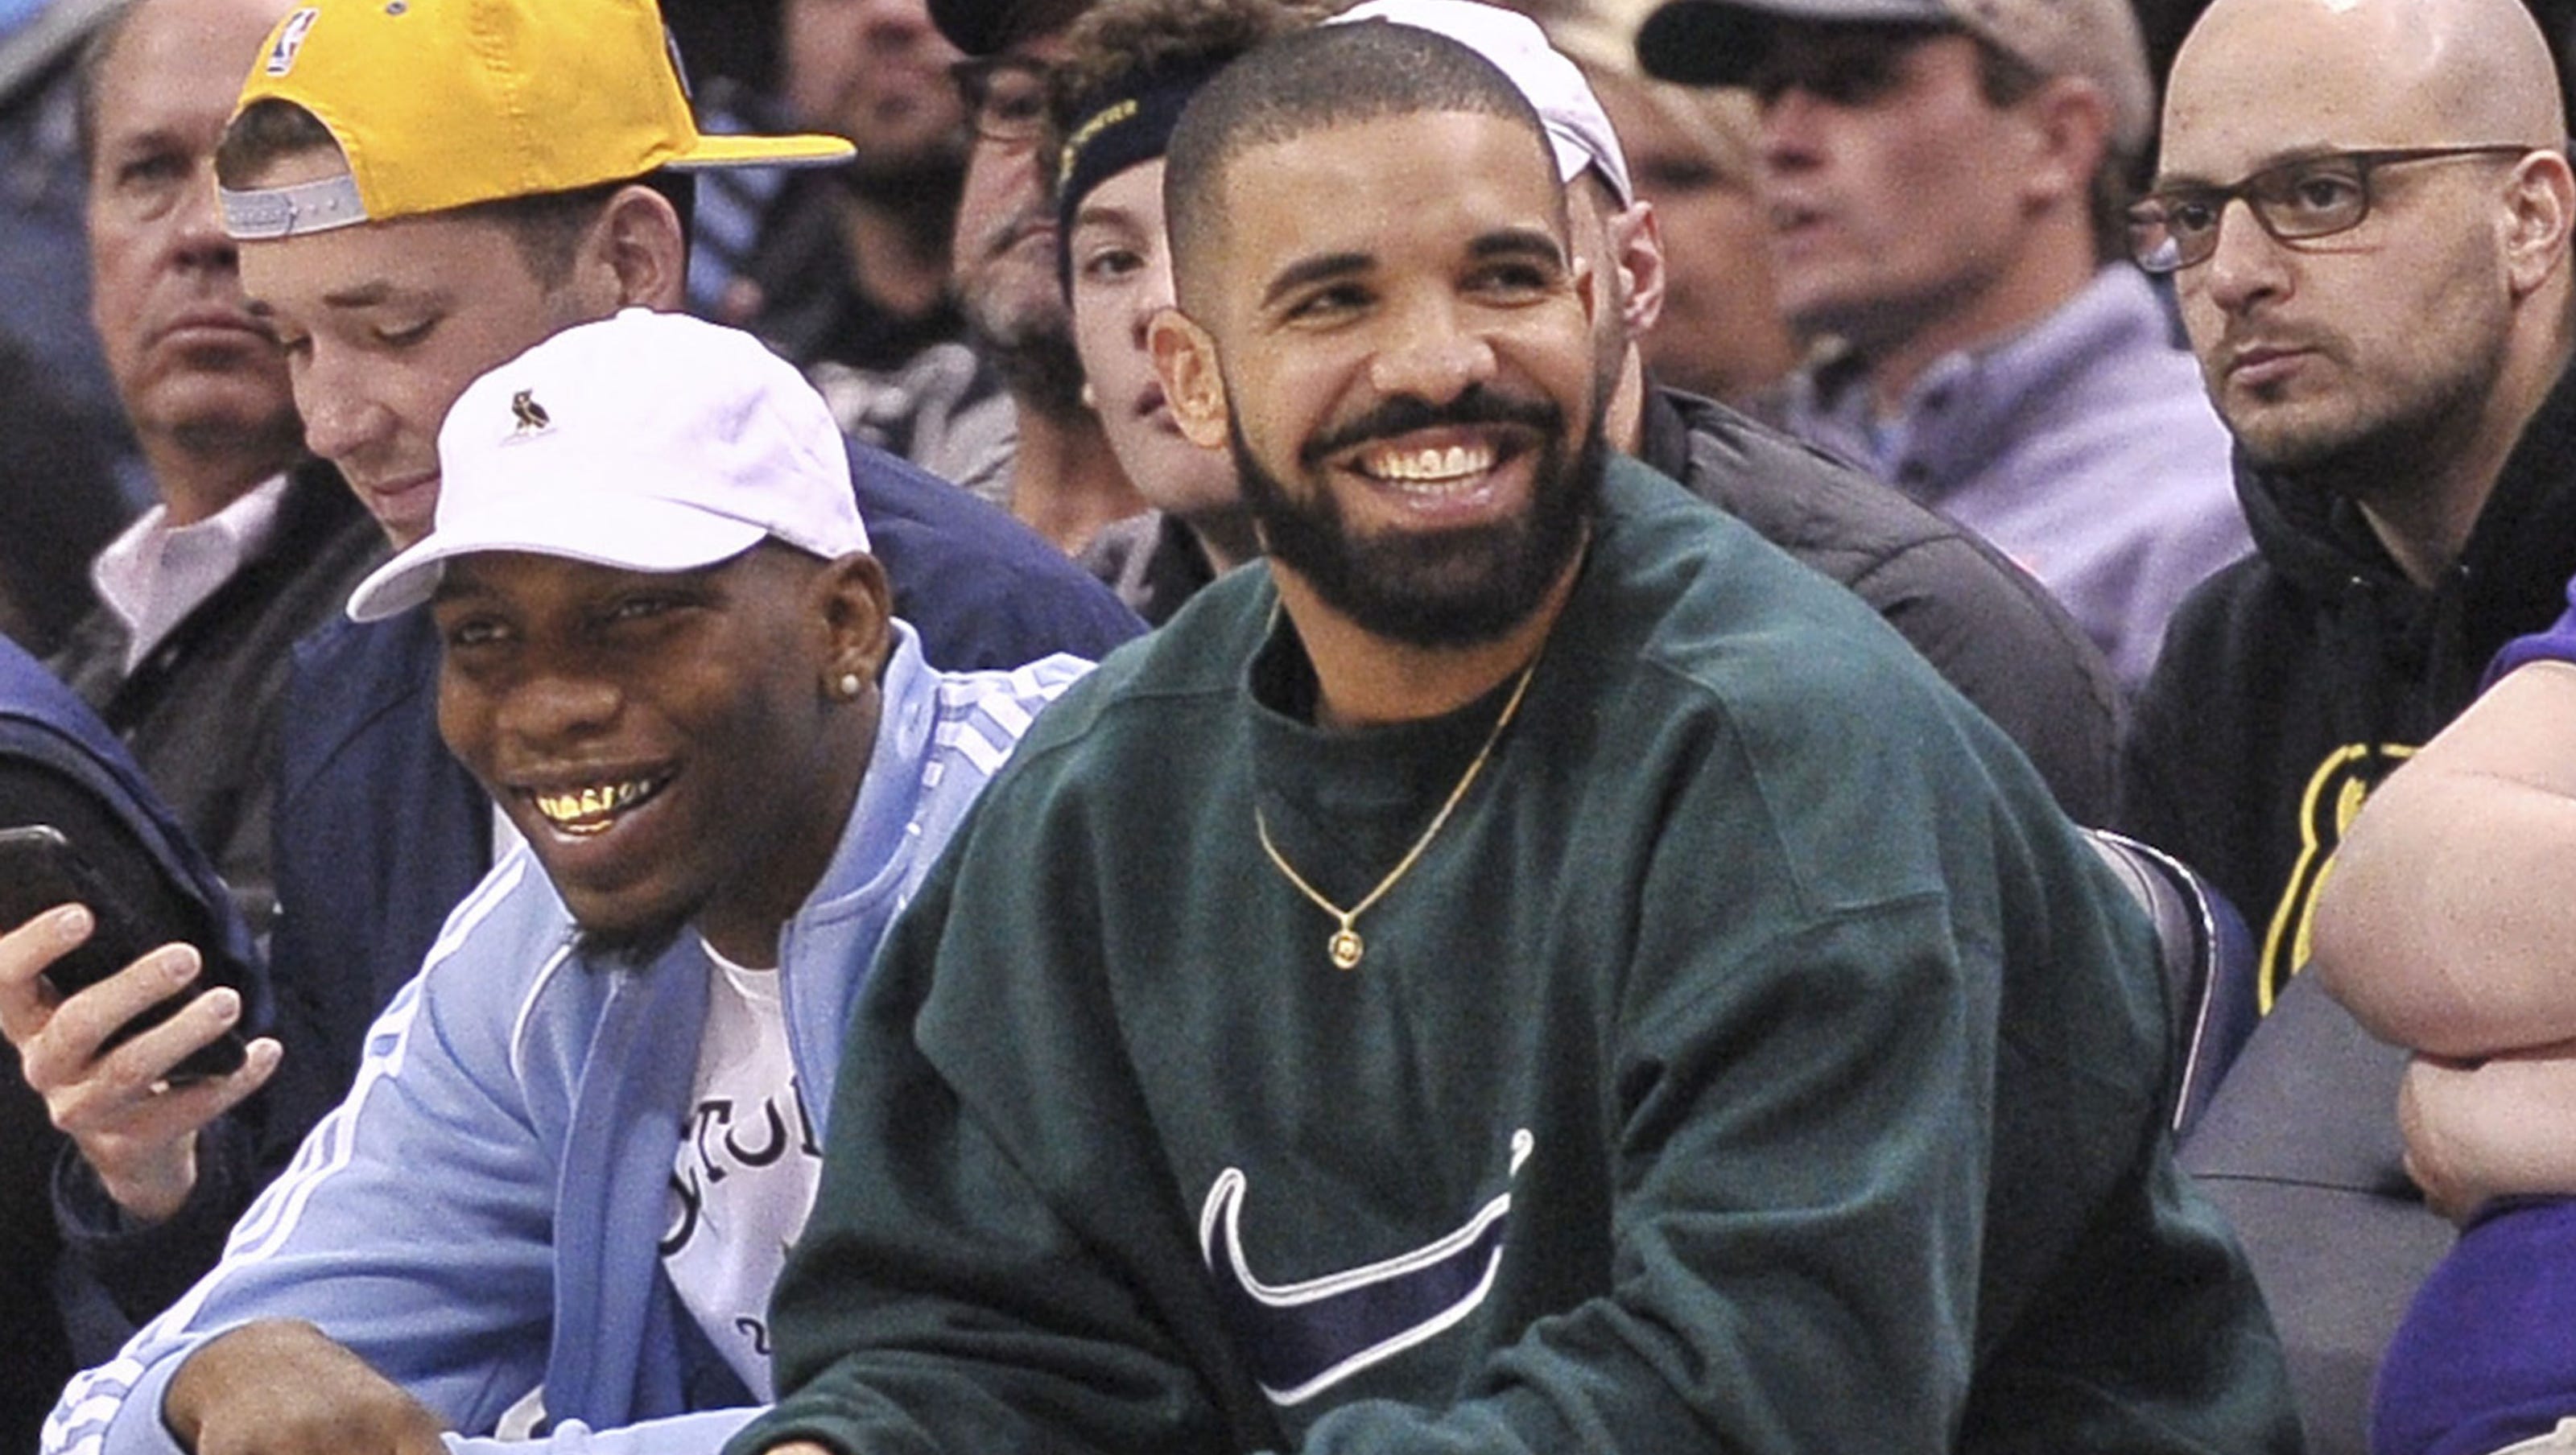 Drake's Spotify takeover shows how broken the music industry is